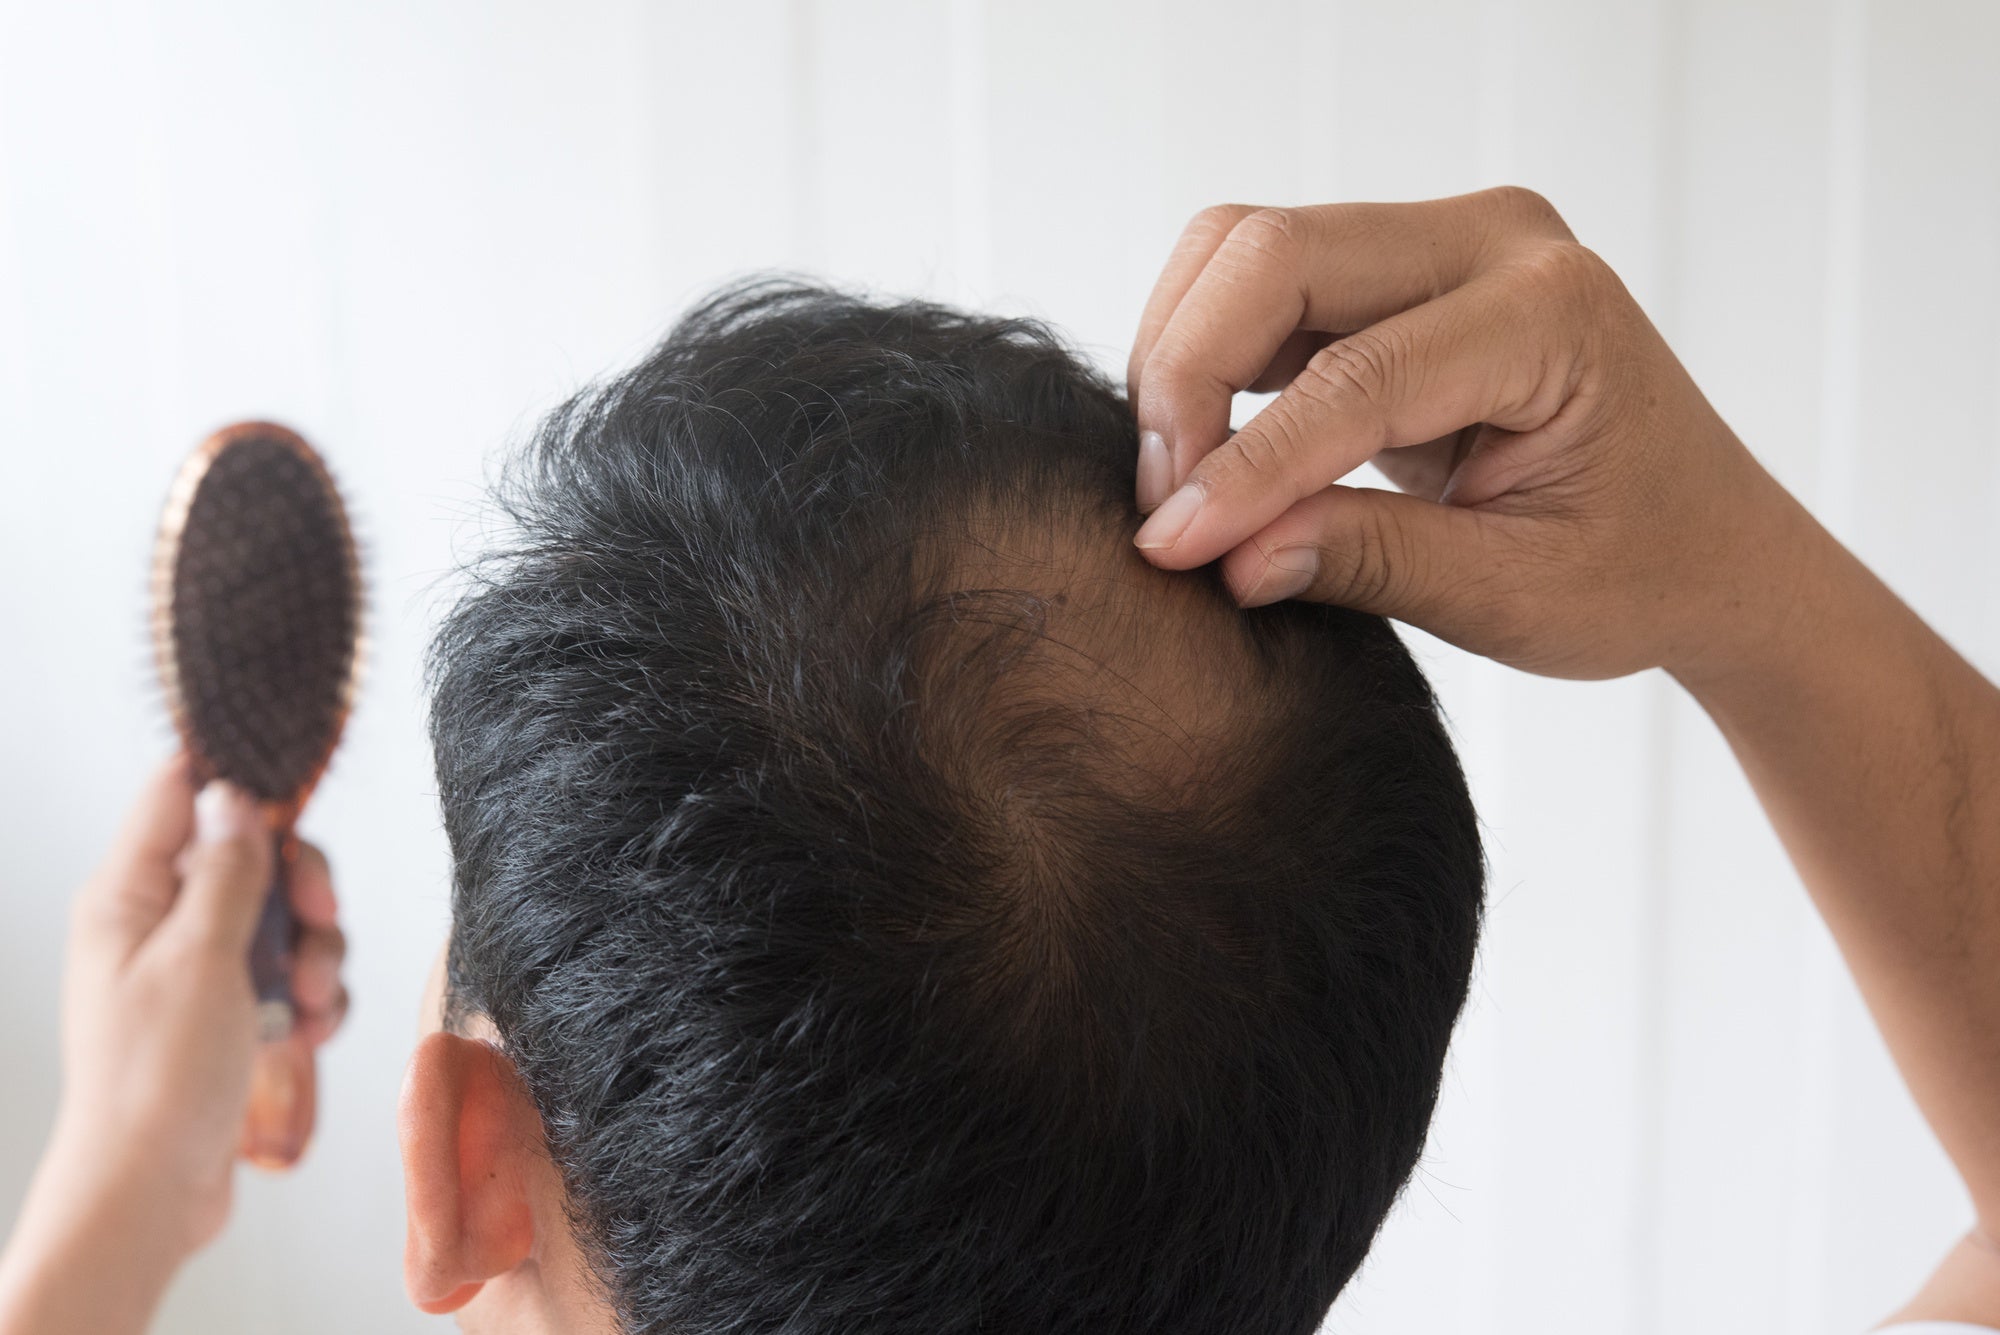 Hair Loss and Confidence: How Reversing Hair Loss Can Boost Self-Esteem